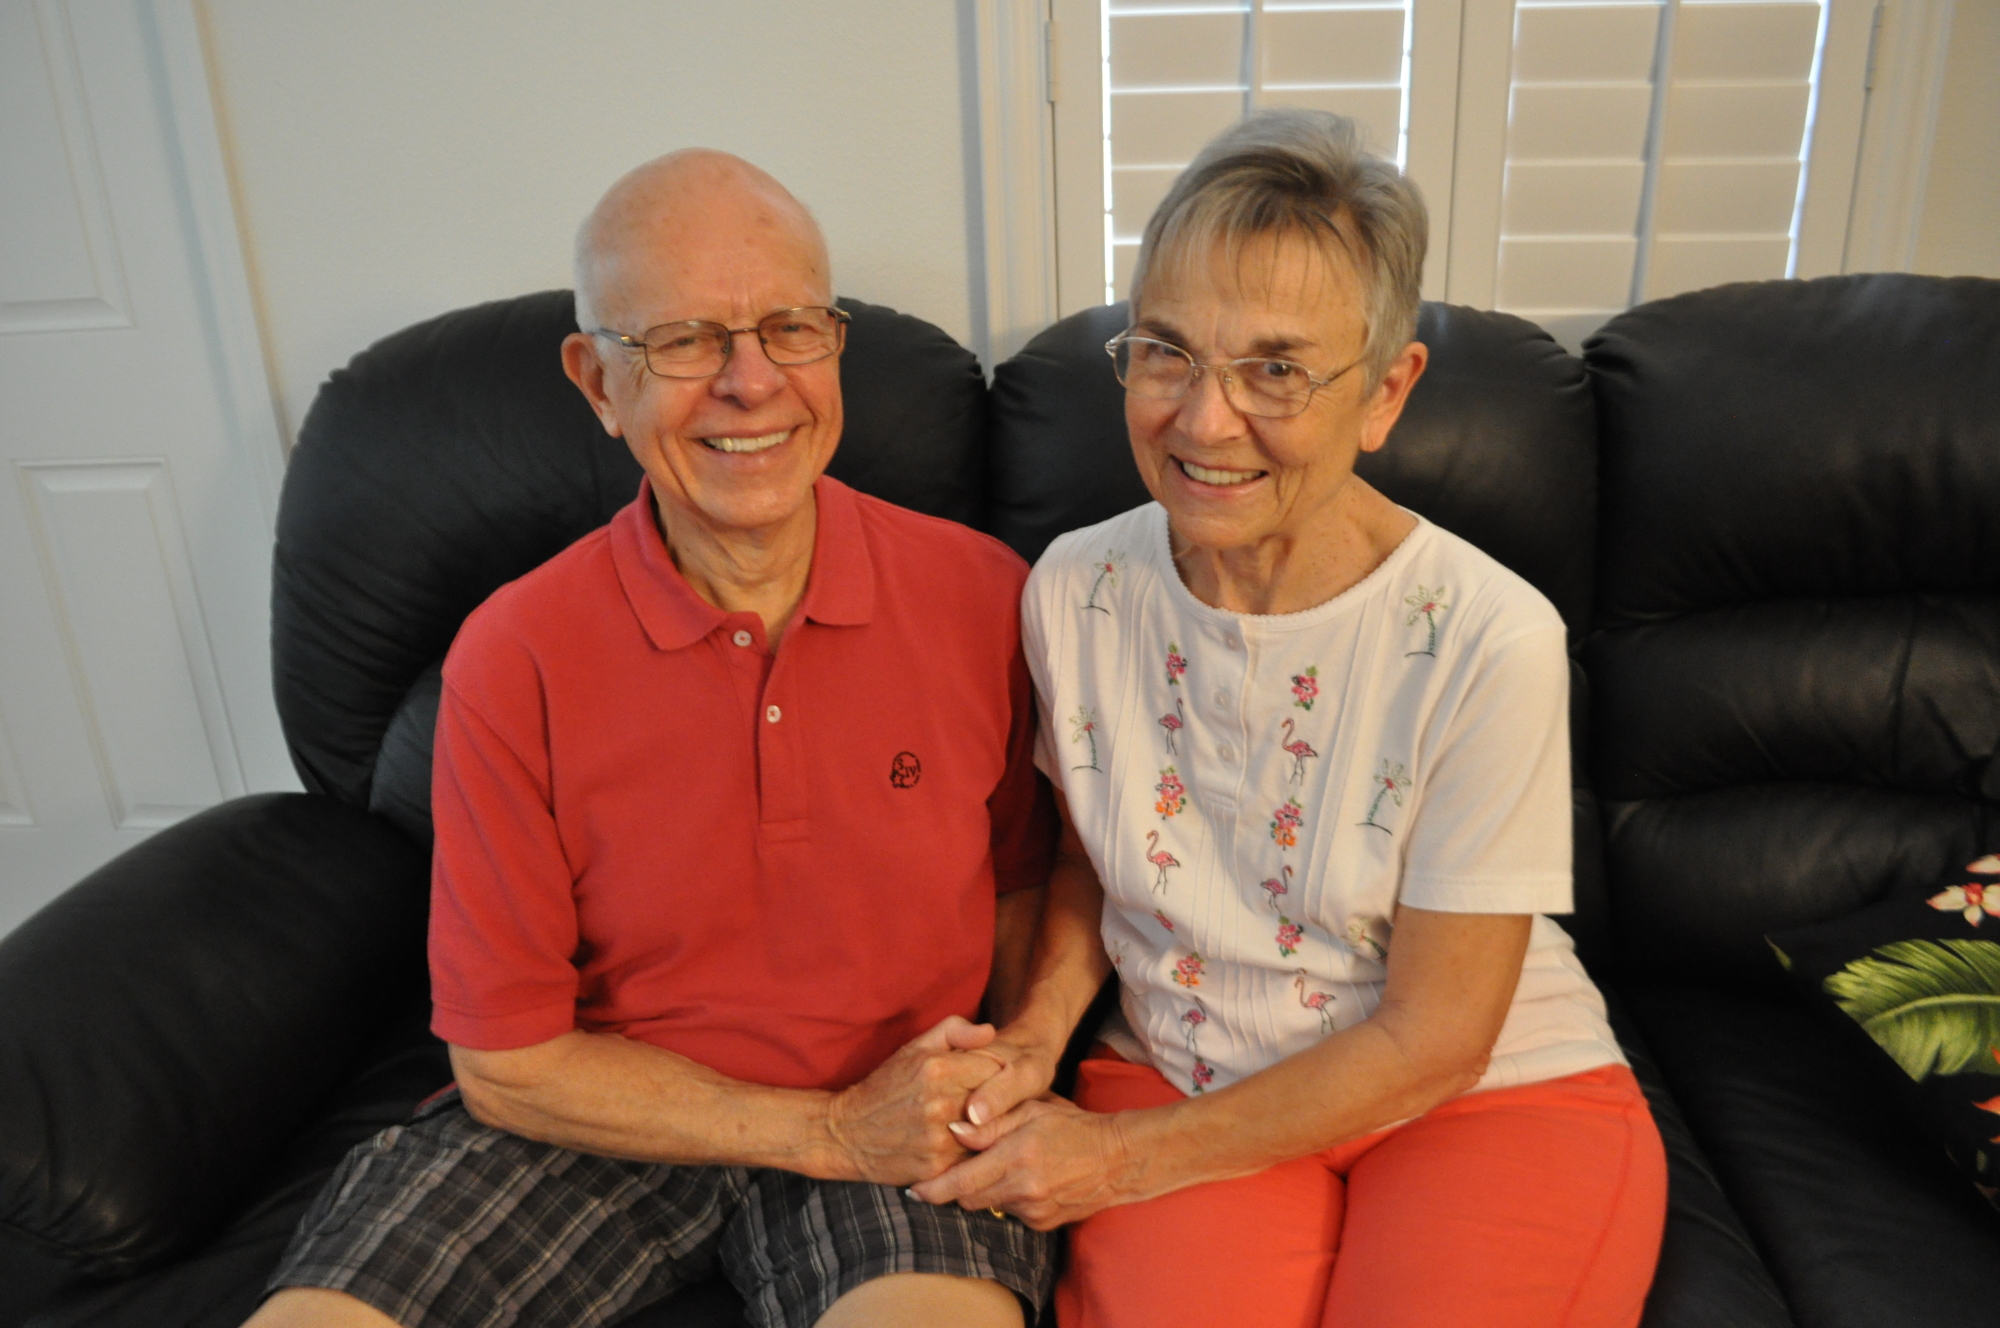 Greenbrook Walk residents Jim and Babe Reger, 79 and 77, hope to celebrate many more years together.